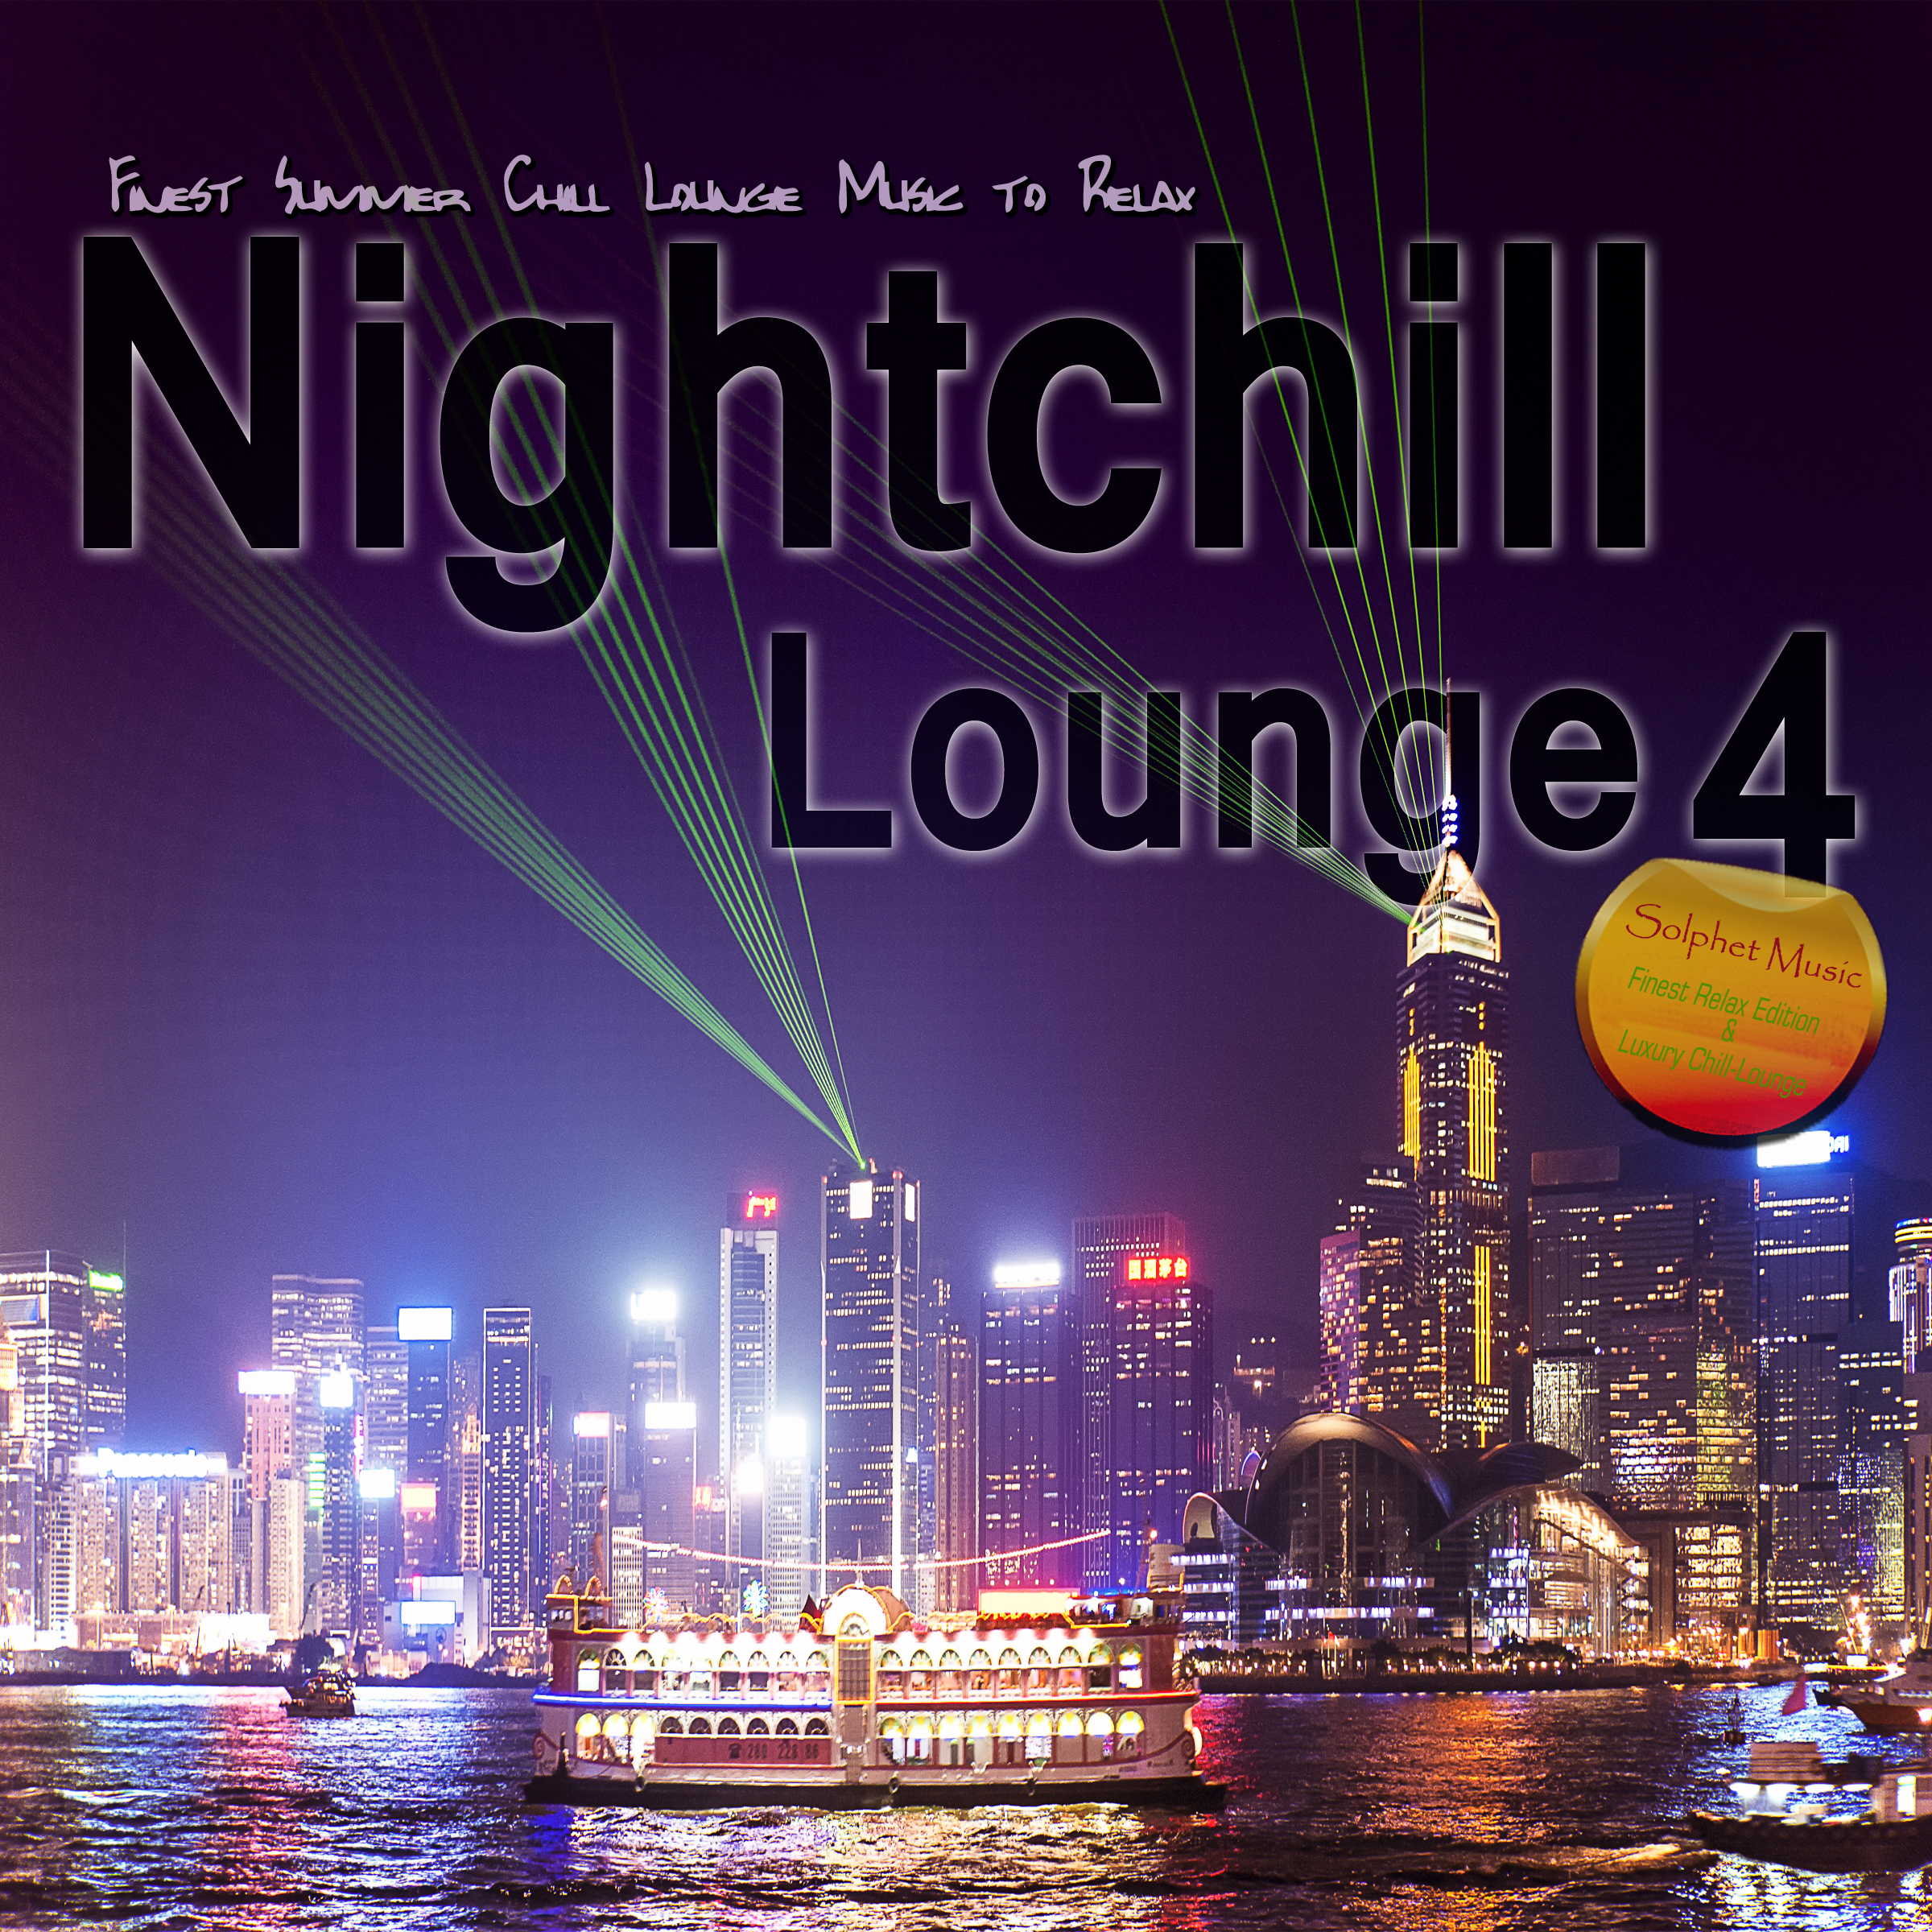 Nightchill Lounge 4 (Finest Summer Chill Lounge Music to Relax)